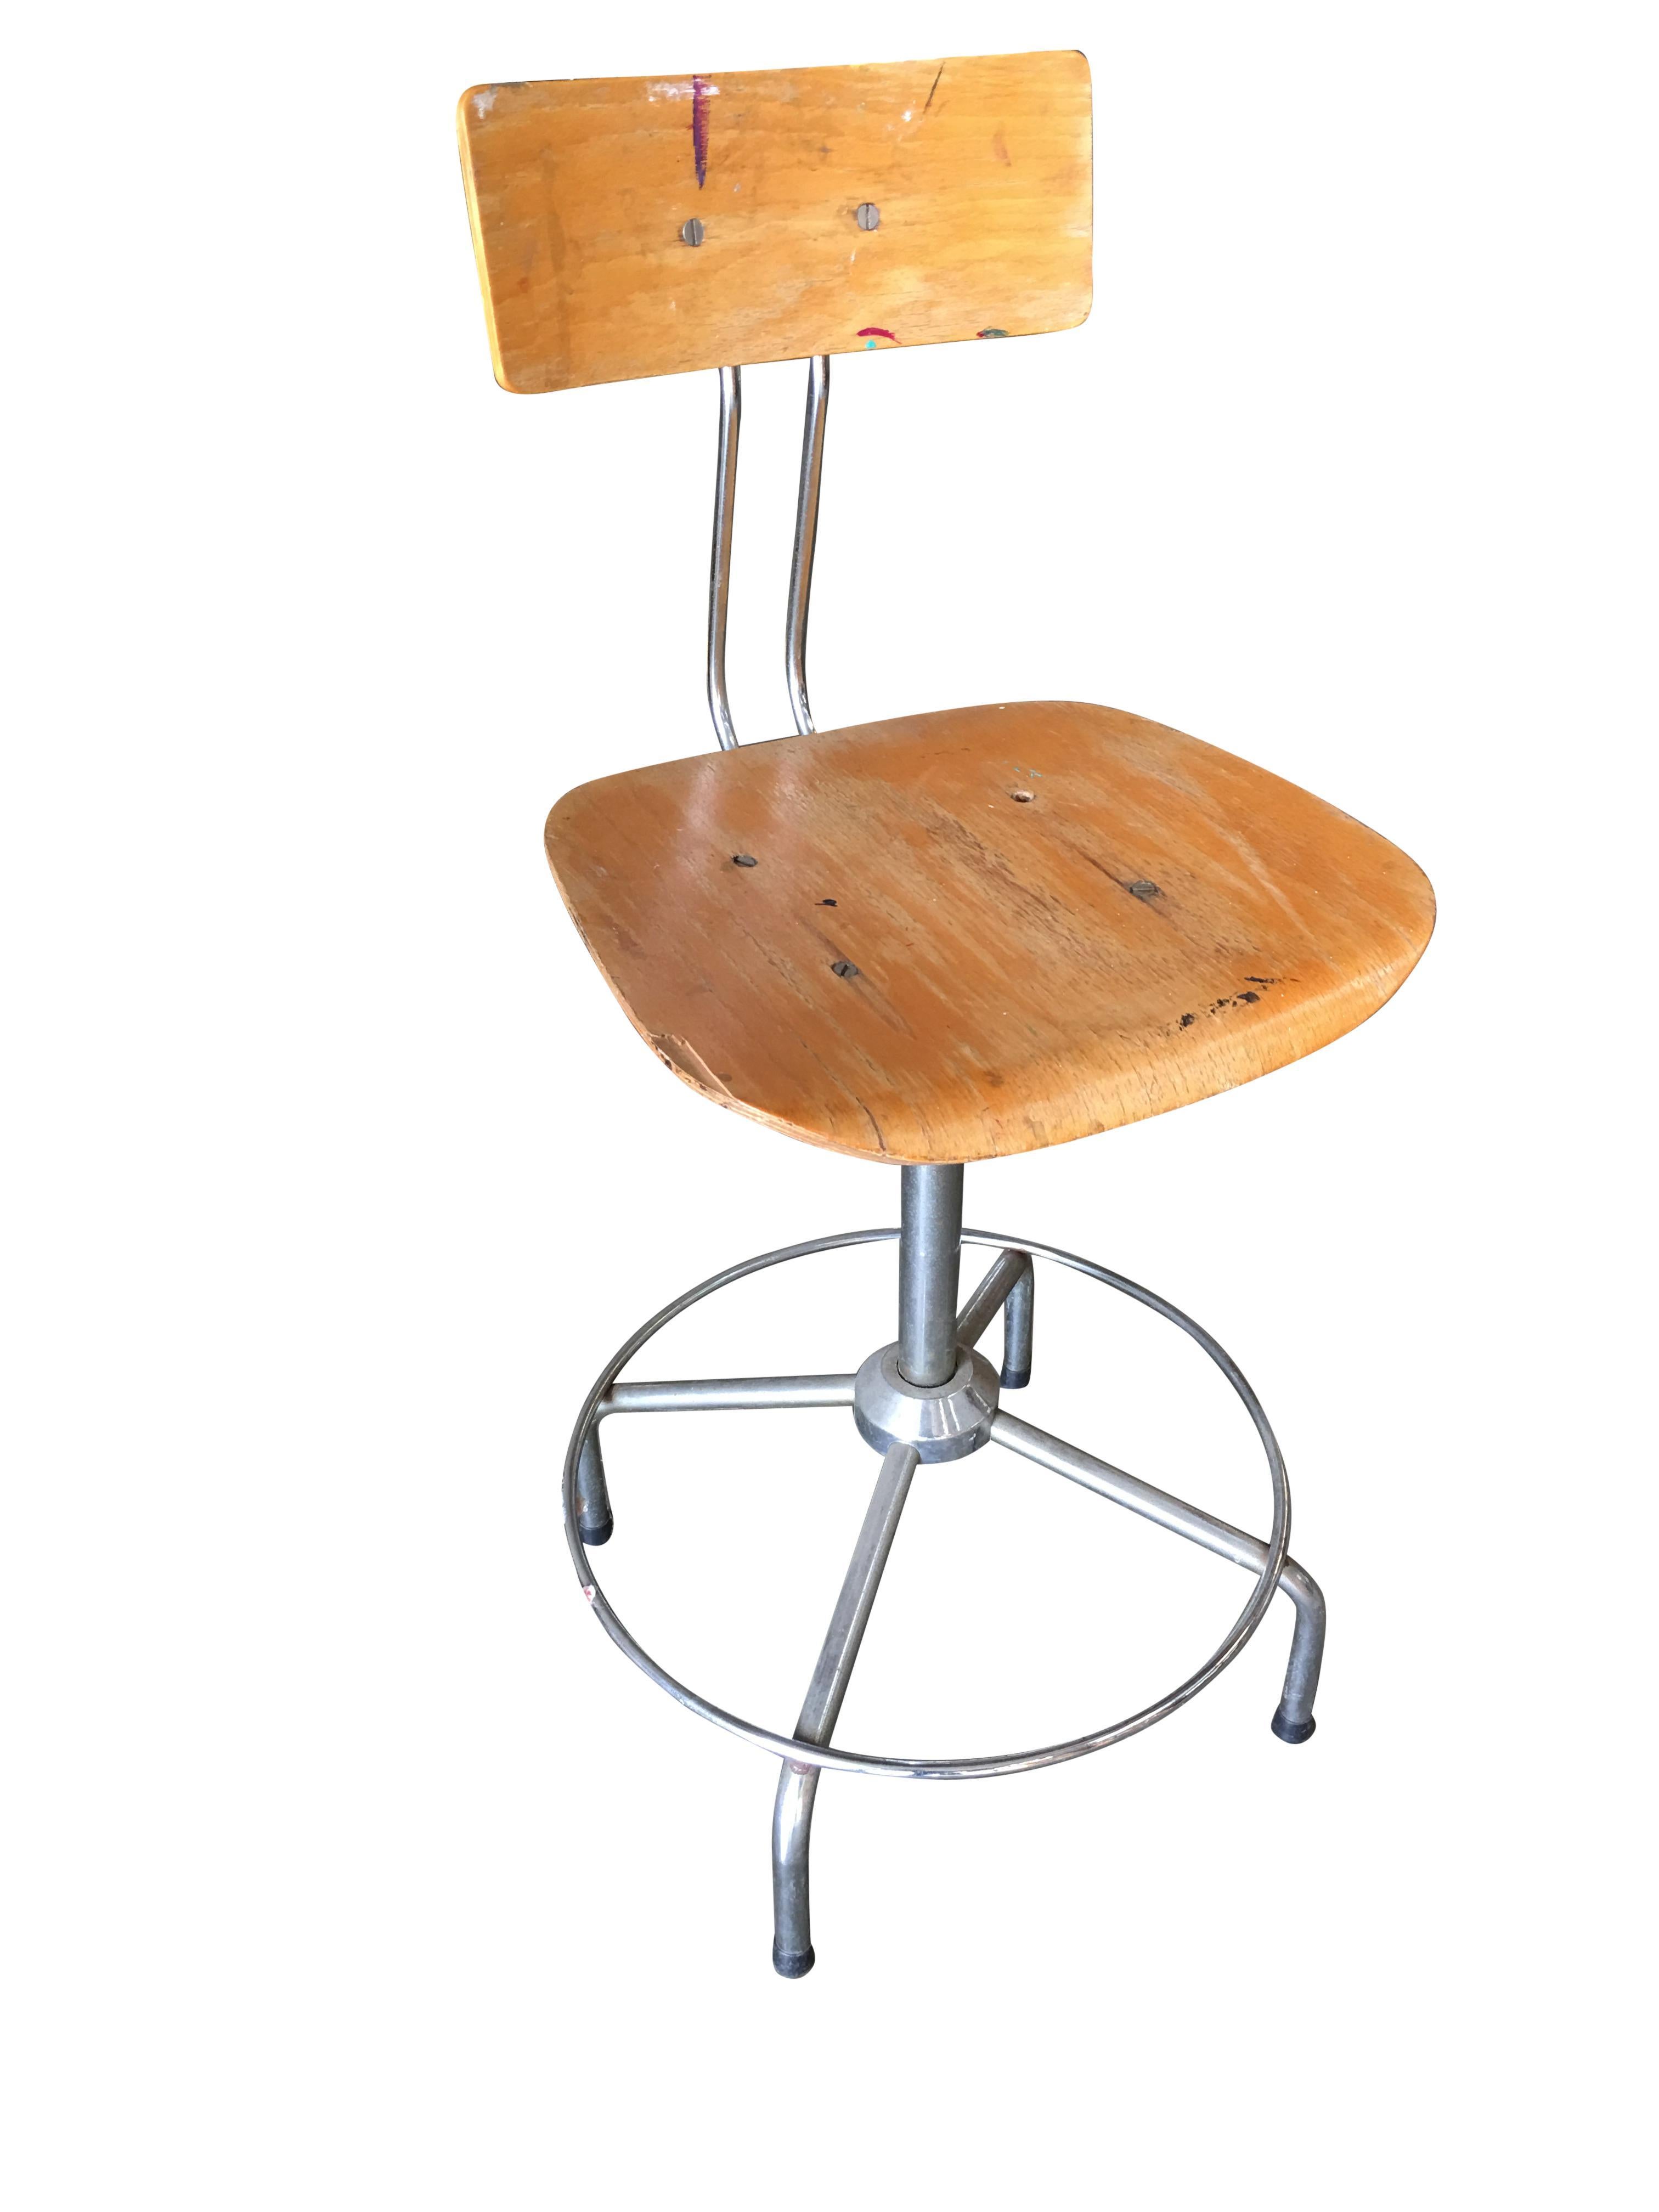 Artist's drafting table work stool featuring a chromed steel base and formed birch plywood seat made by Bieffee in Italy. Circa 1970. This chair has some wear from use. The swivel functions perfectly.

Dimensions:
36